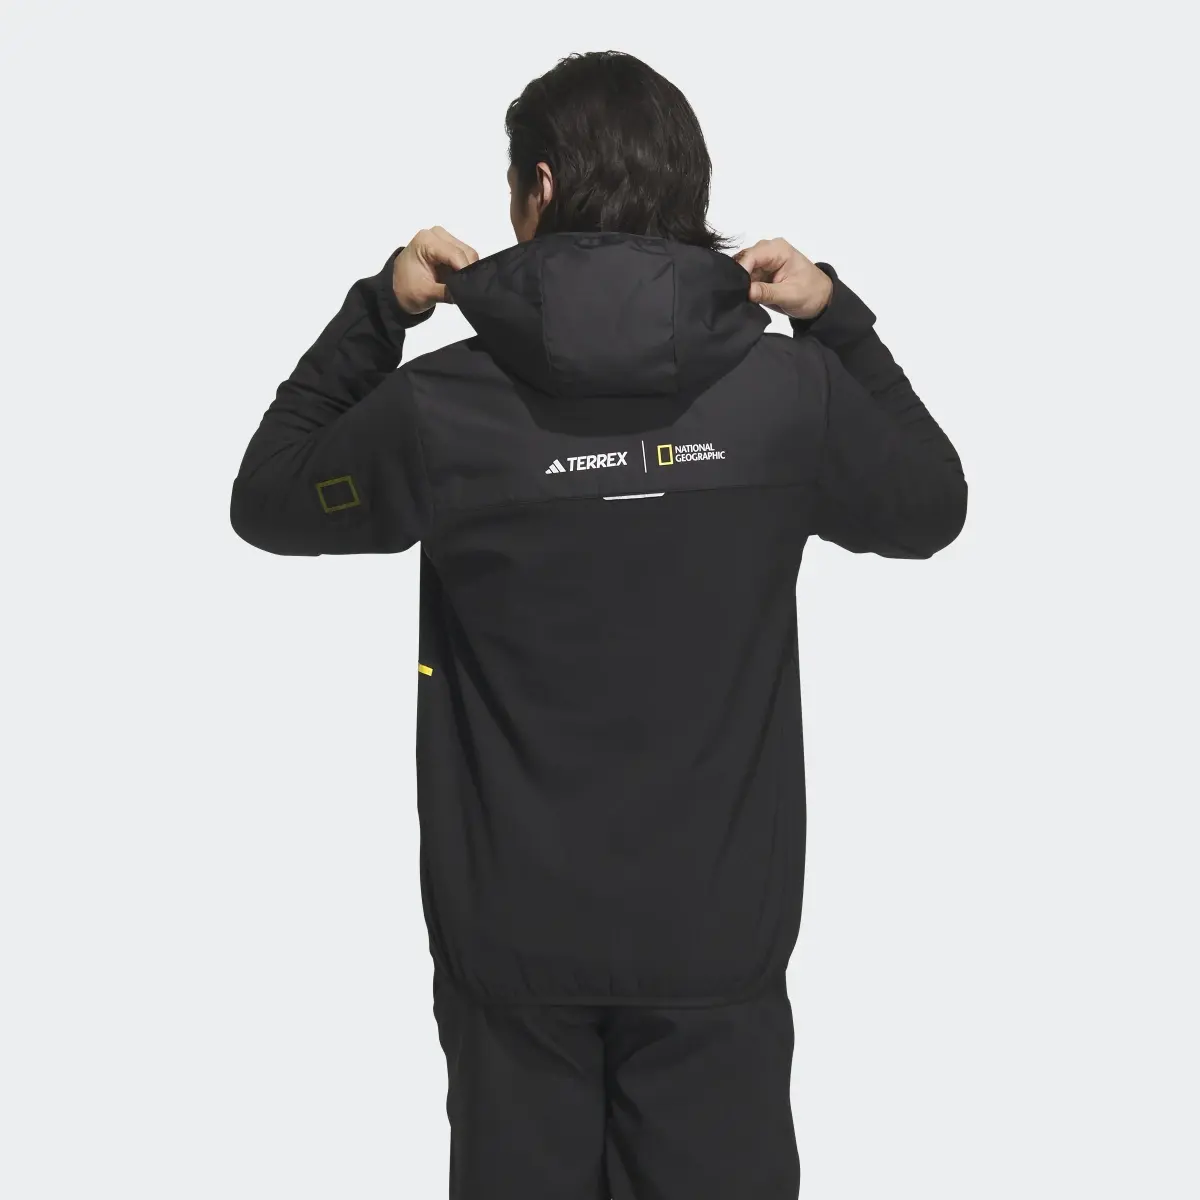 Adidas Veste soft shell National Geographic. 3